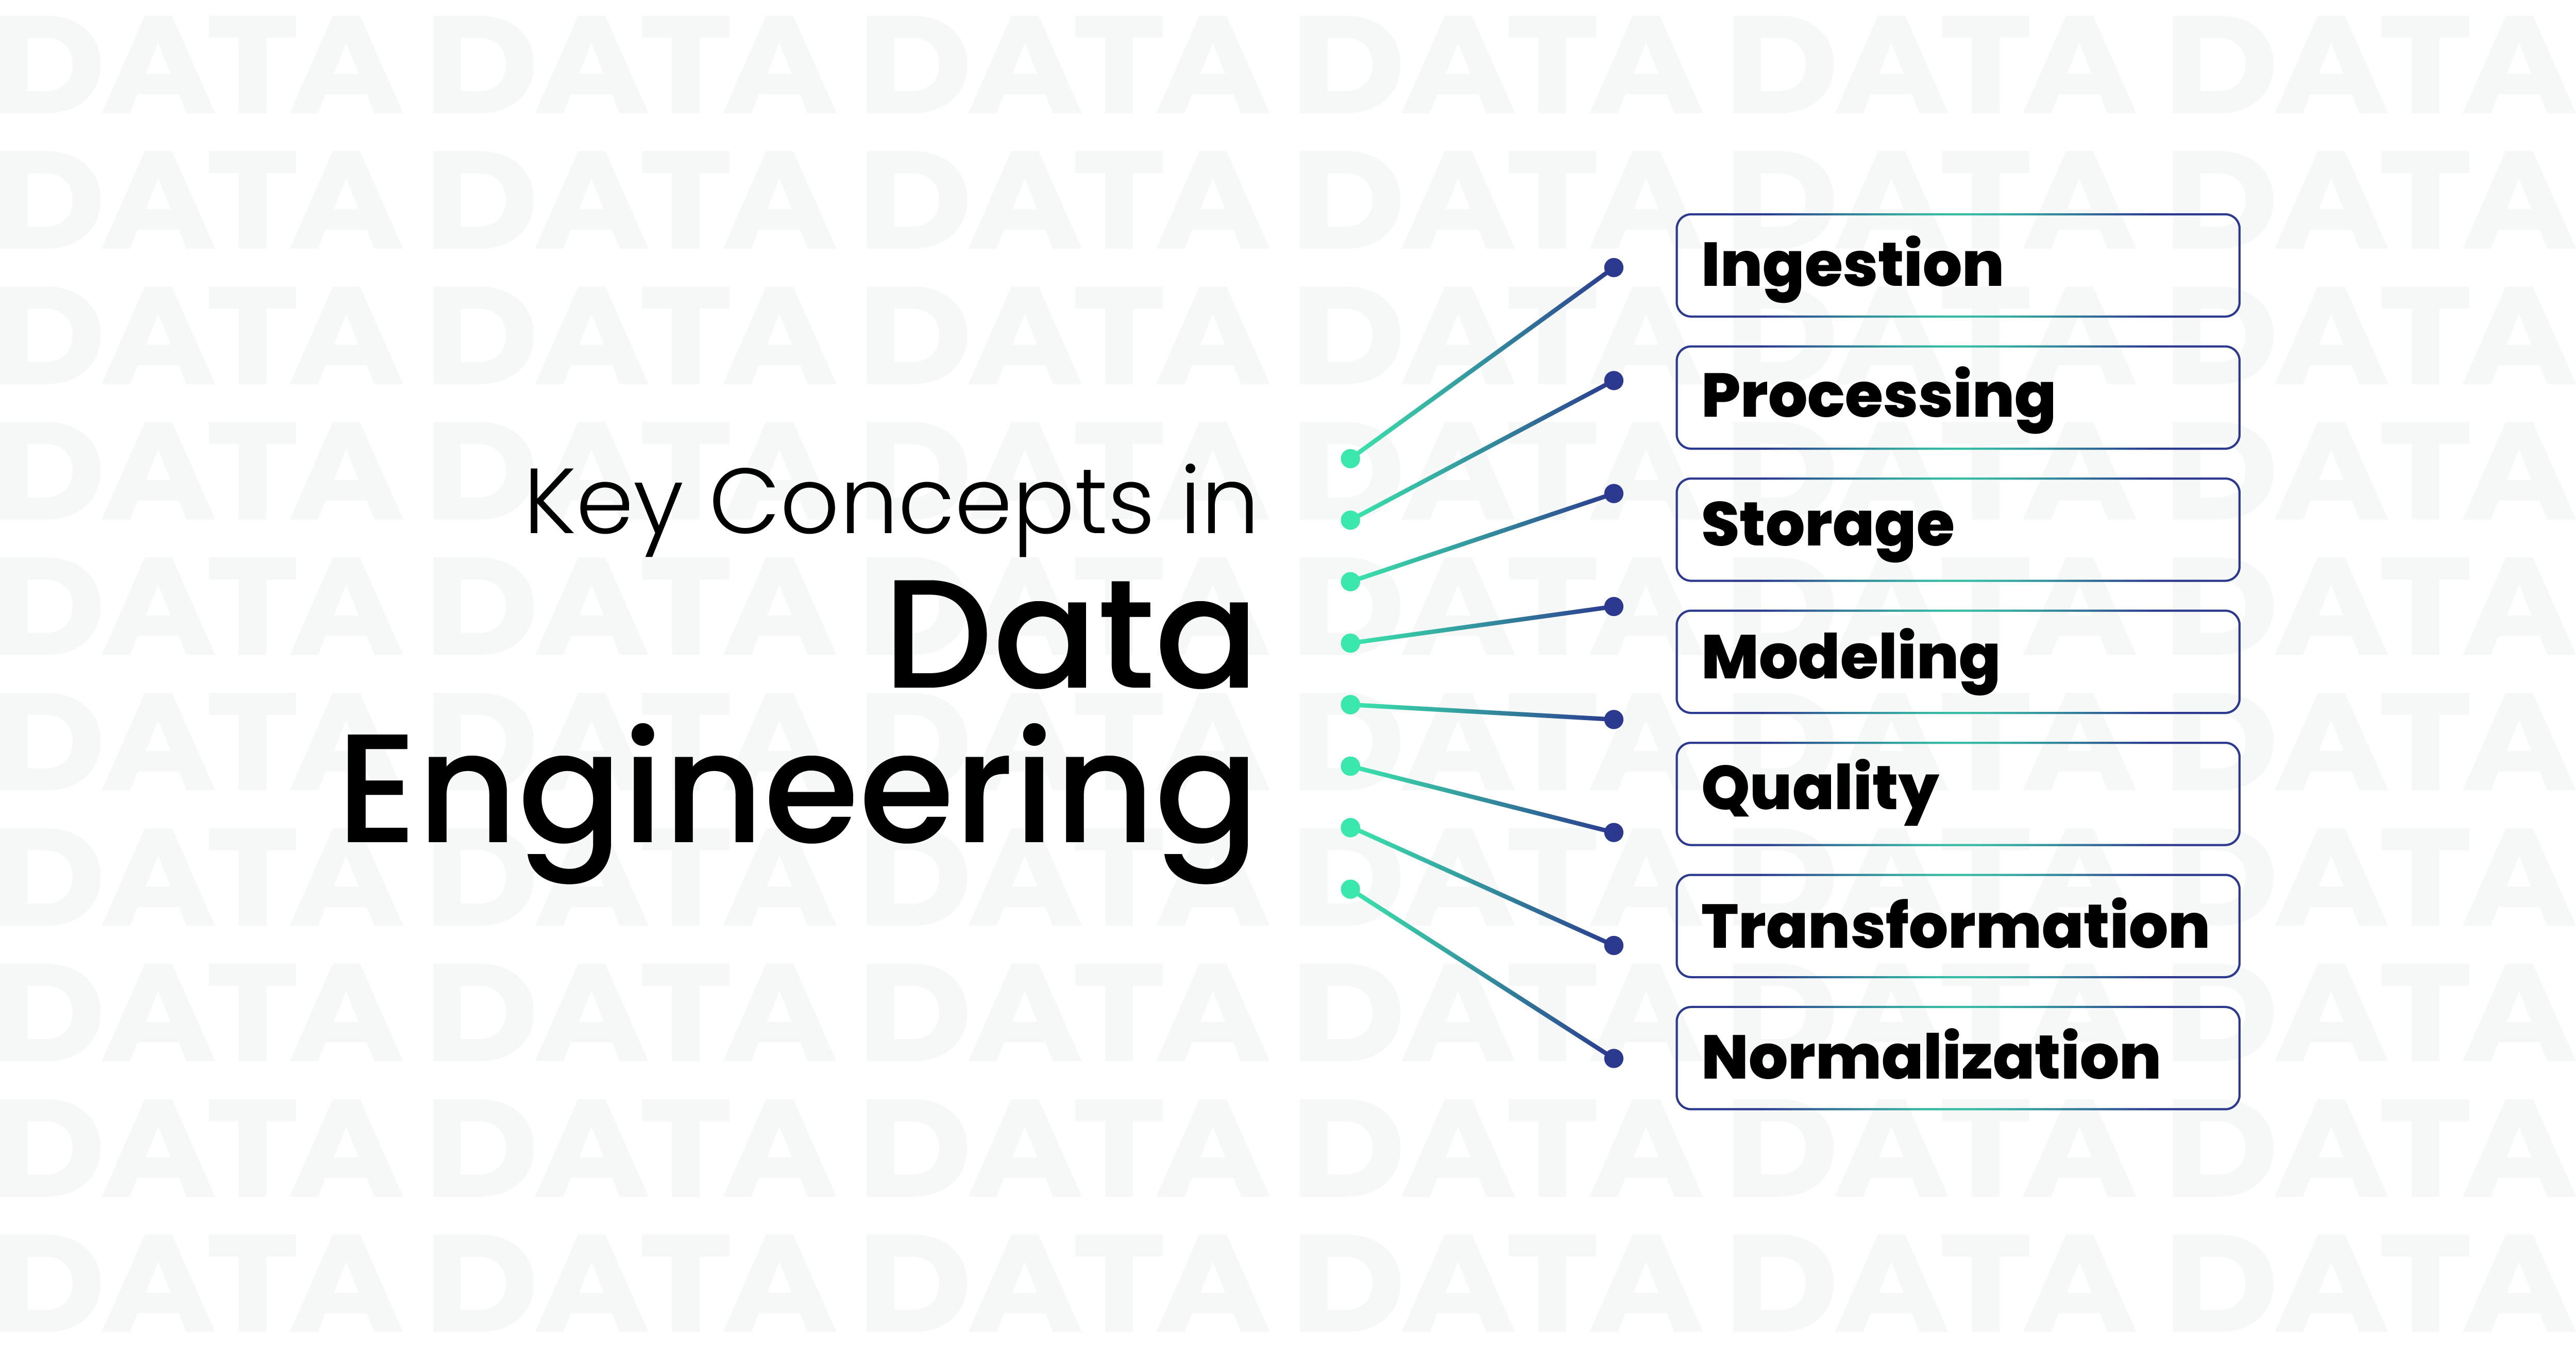 Key Concepts in Data Engineering